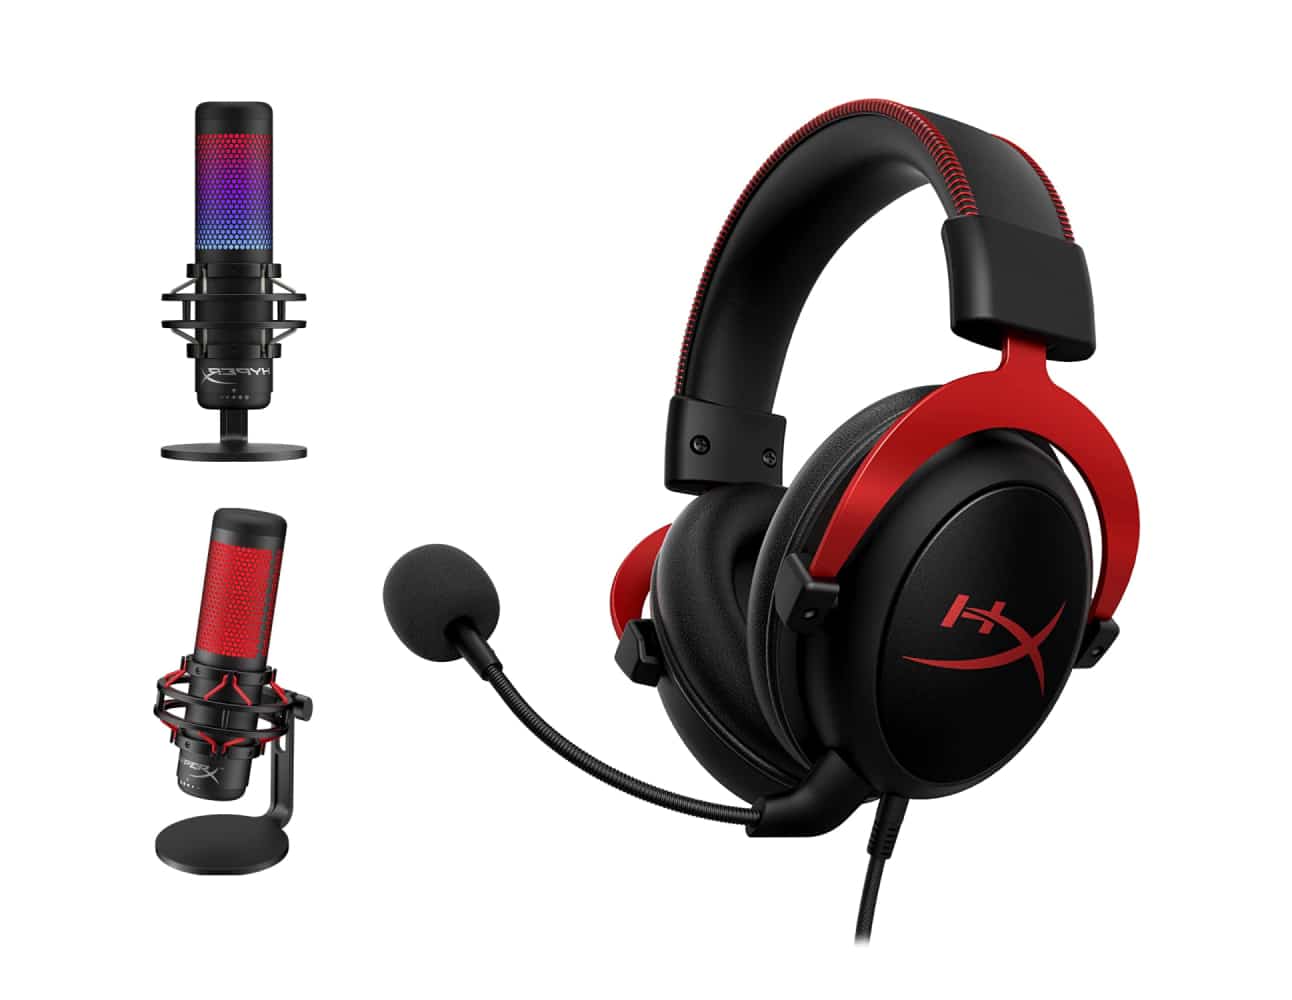 HyperX red gaming headset 2 microphones for streamers